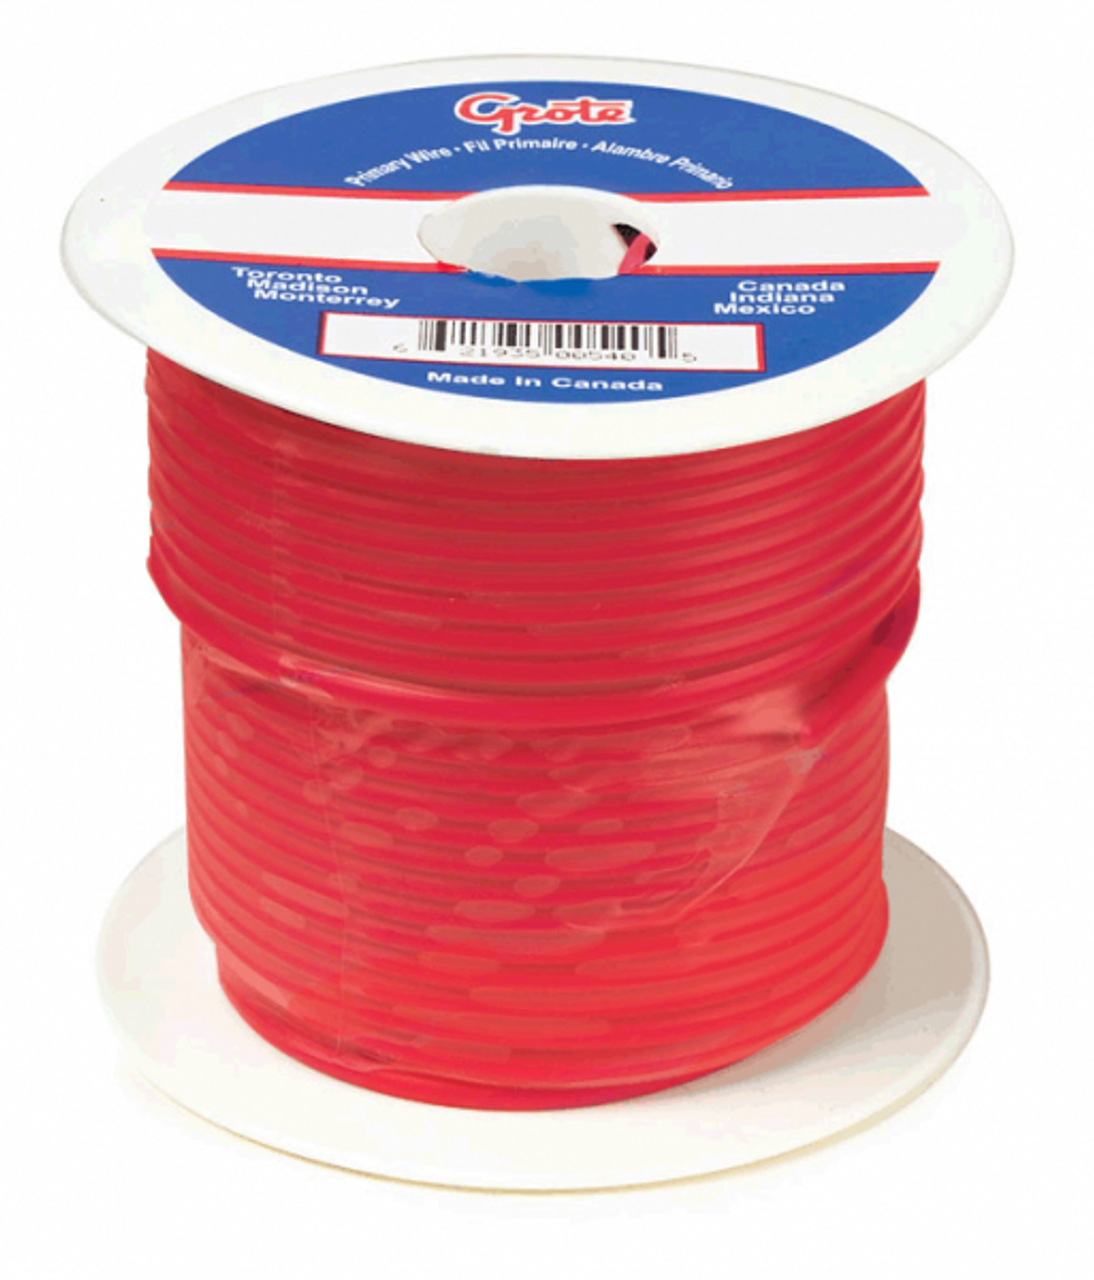 Grote 87-5000 Primary Wire- 10 GA, 100'- Red